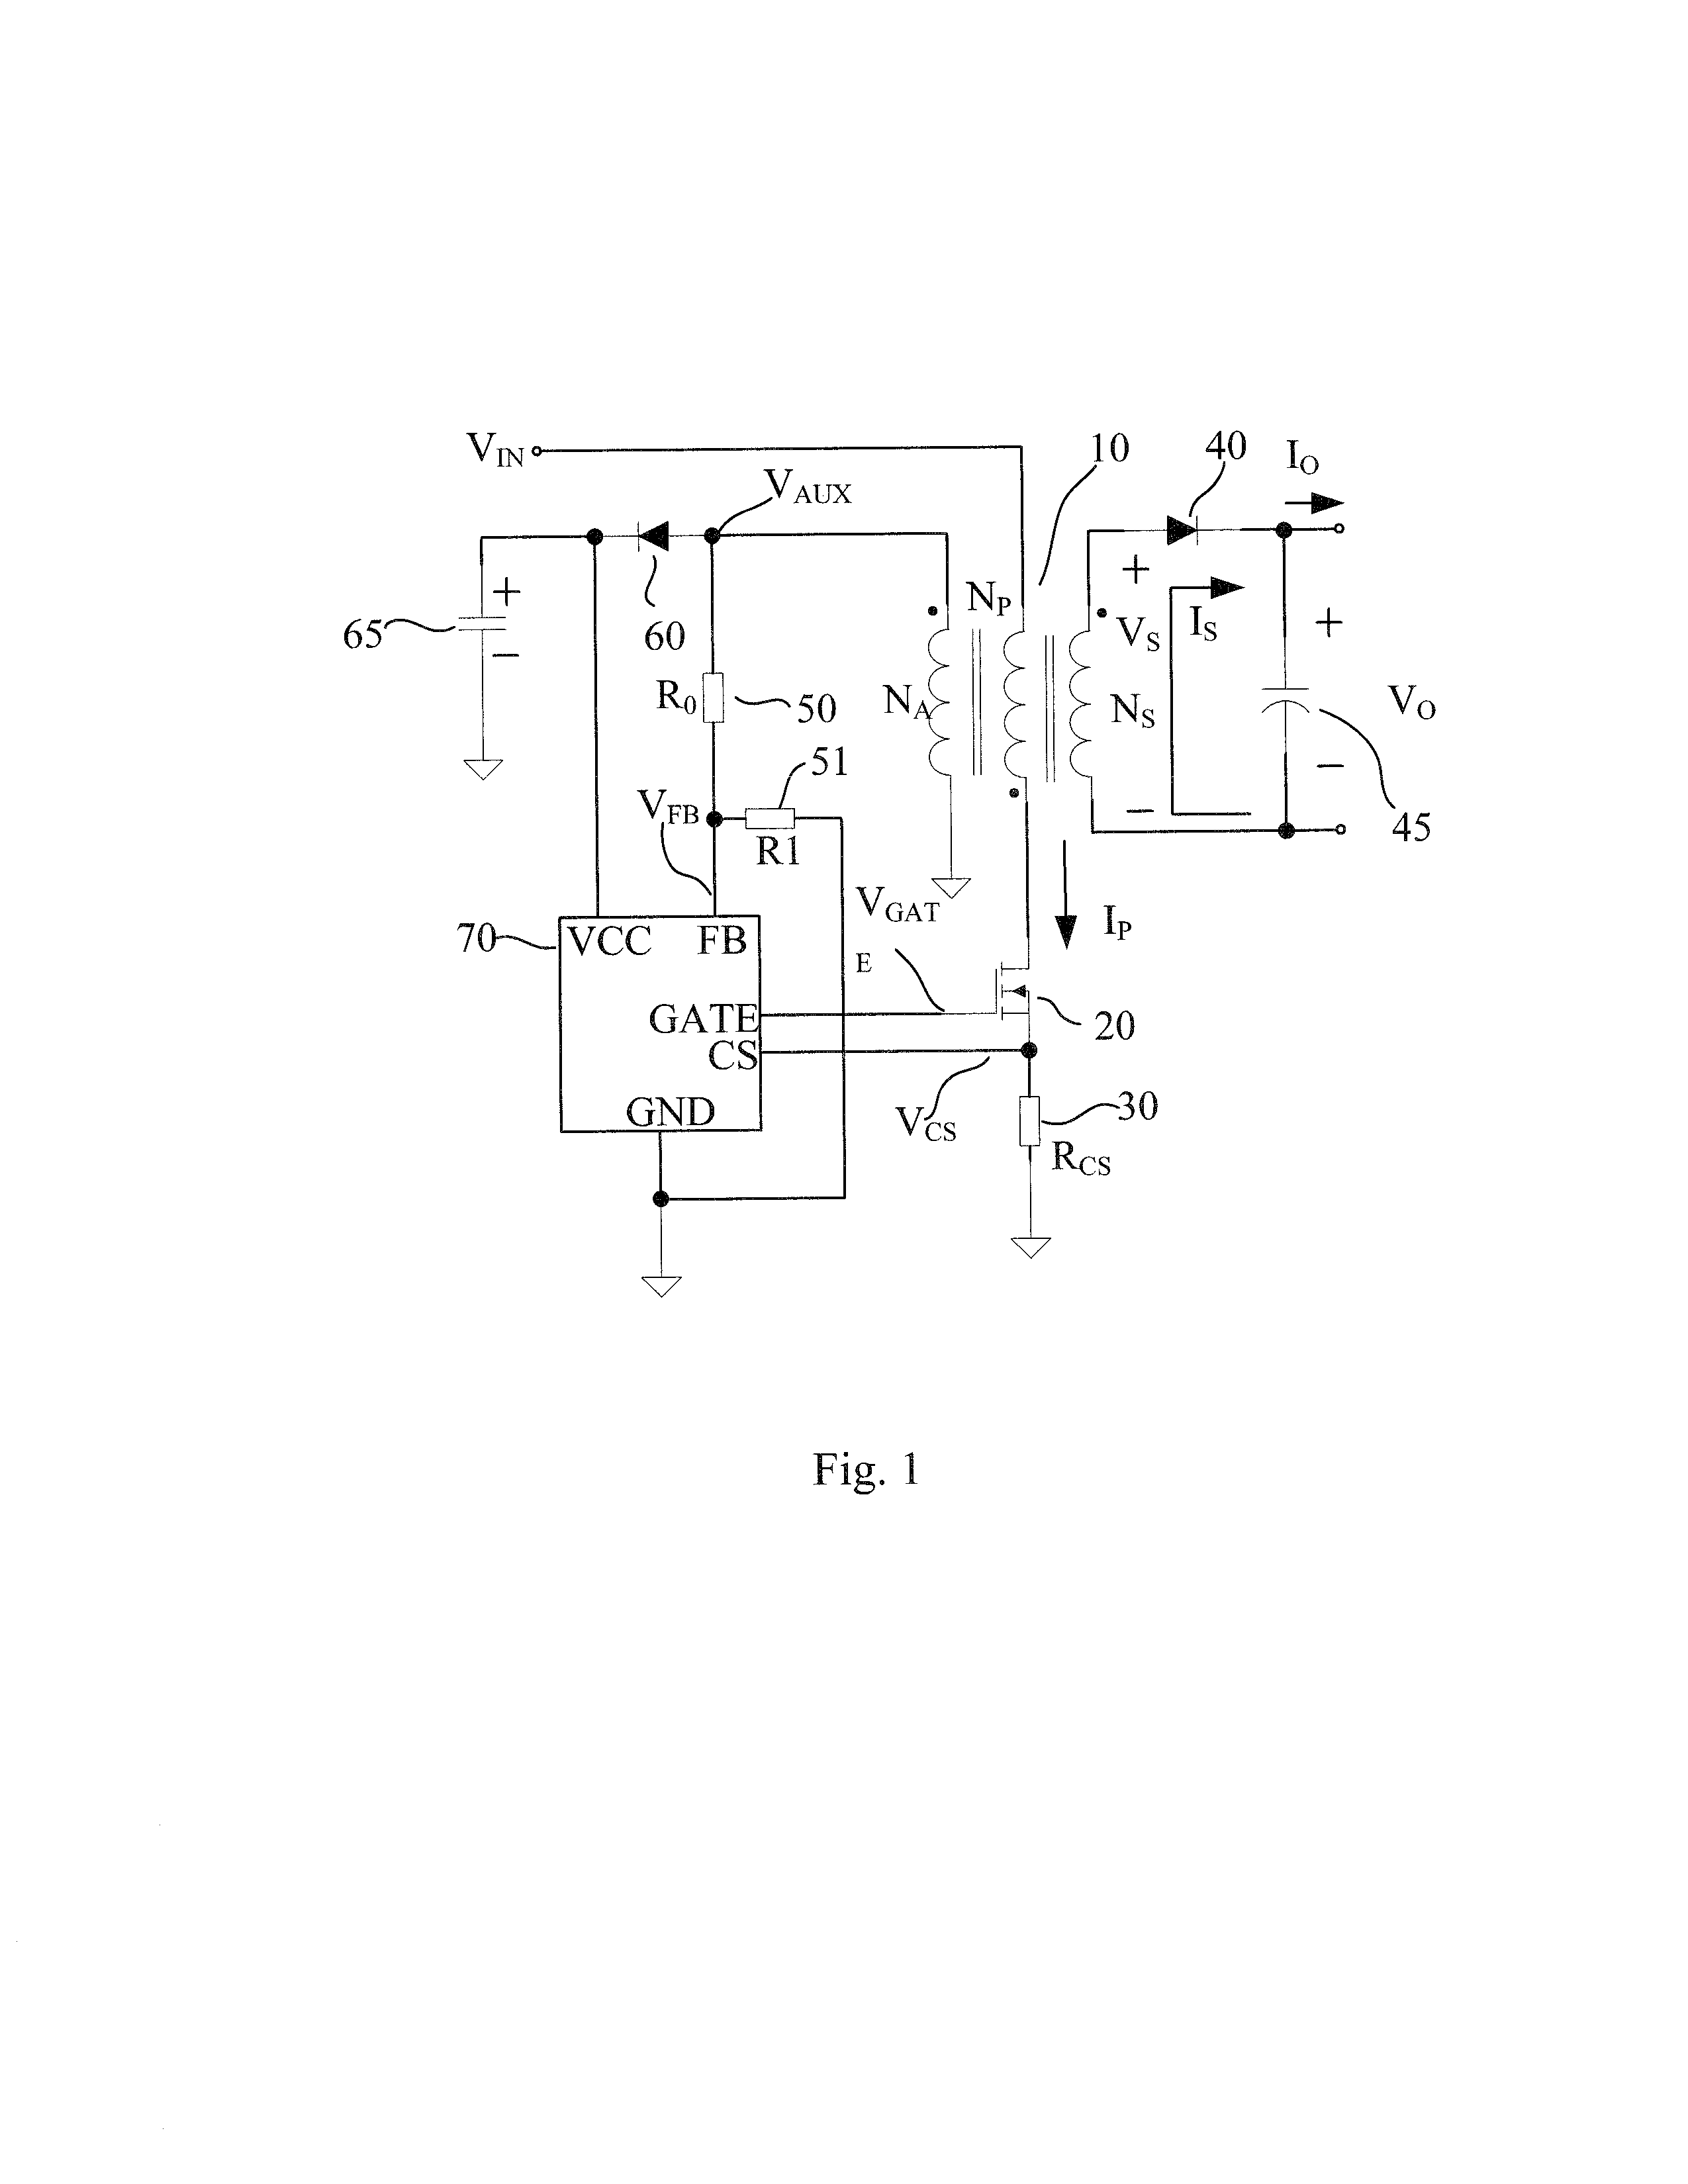 Primary-side feedback controlled ac/DC converter with an improved error amplifier